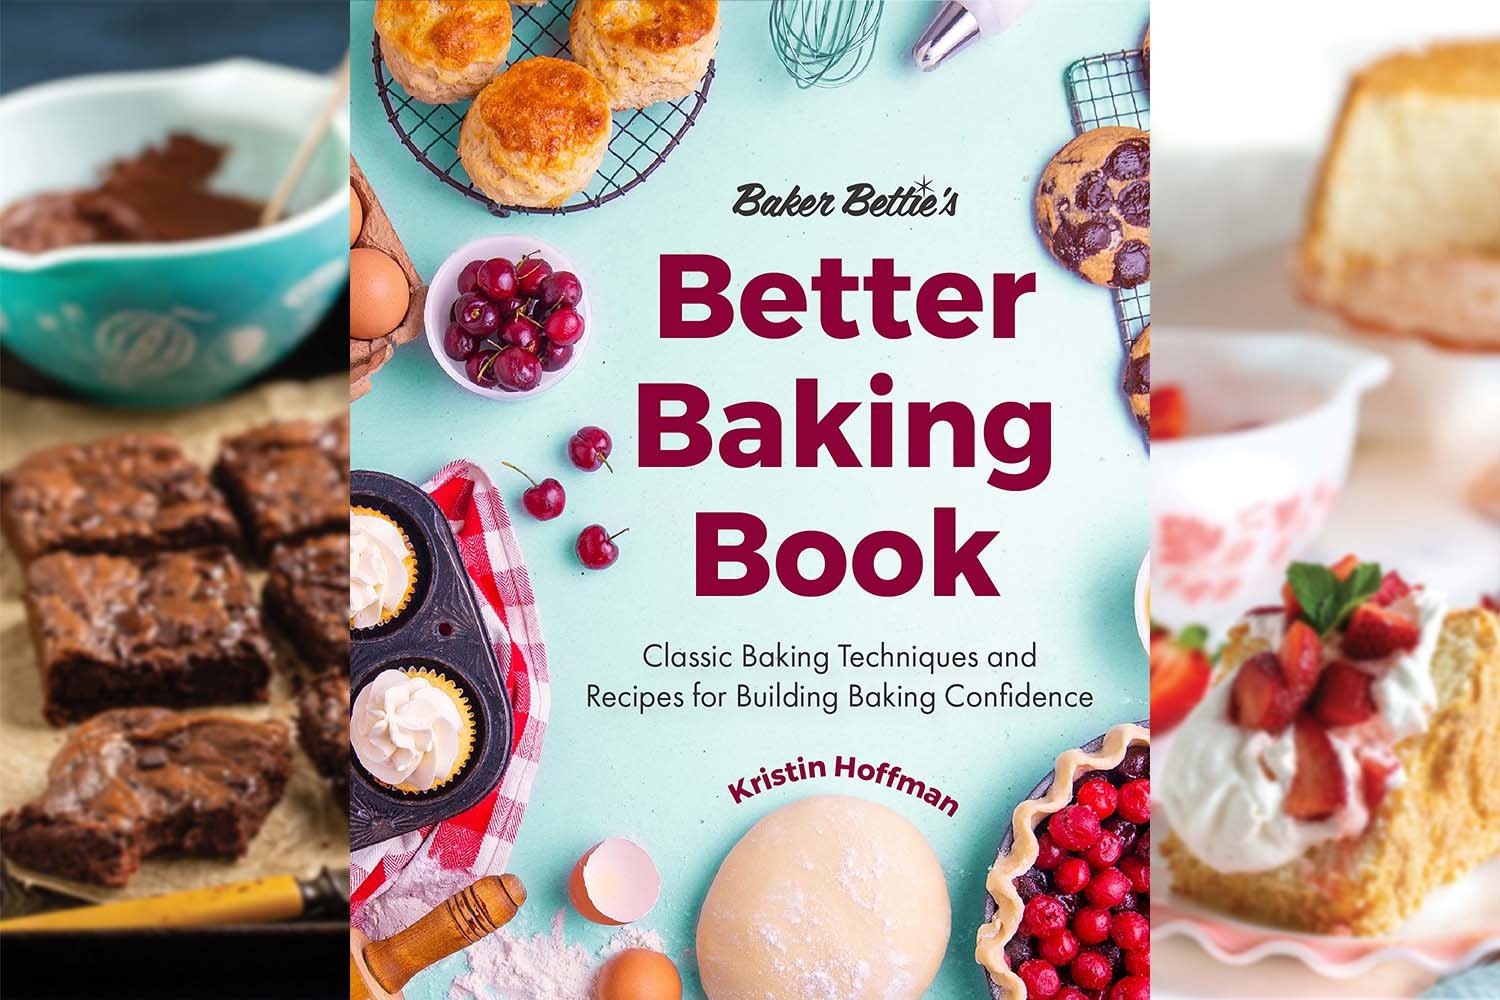 Q&A with Kristin Hoffman, author of Baker Bettie's Better Baking Book